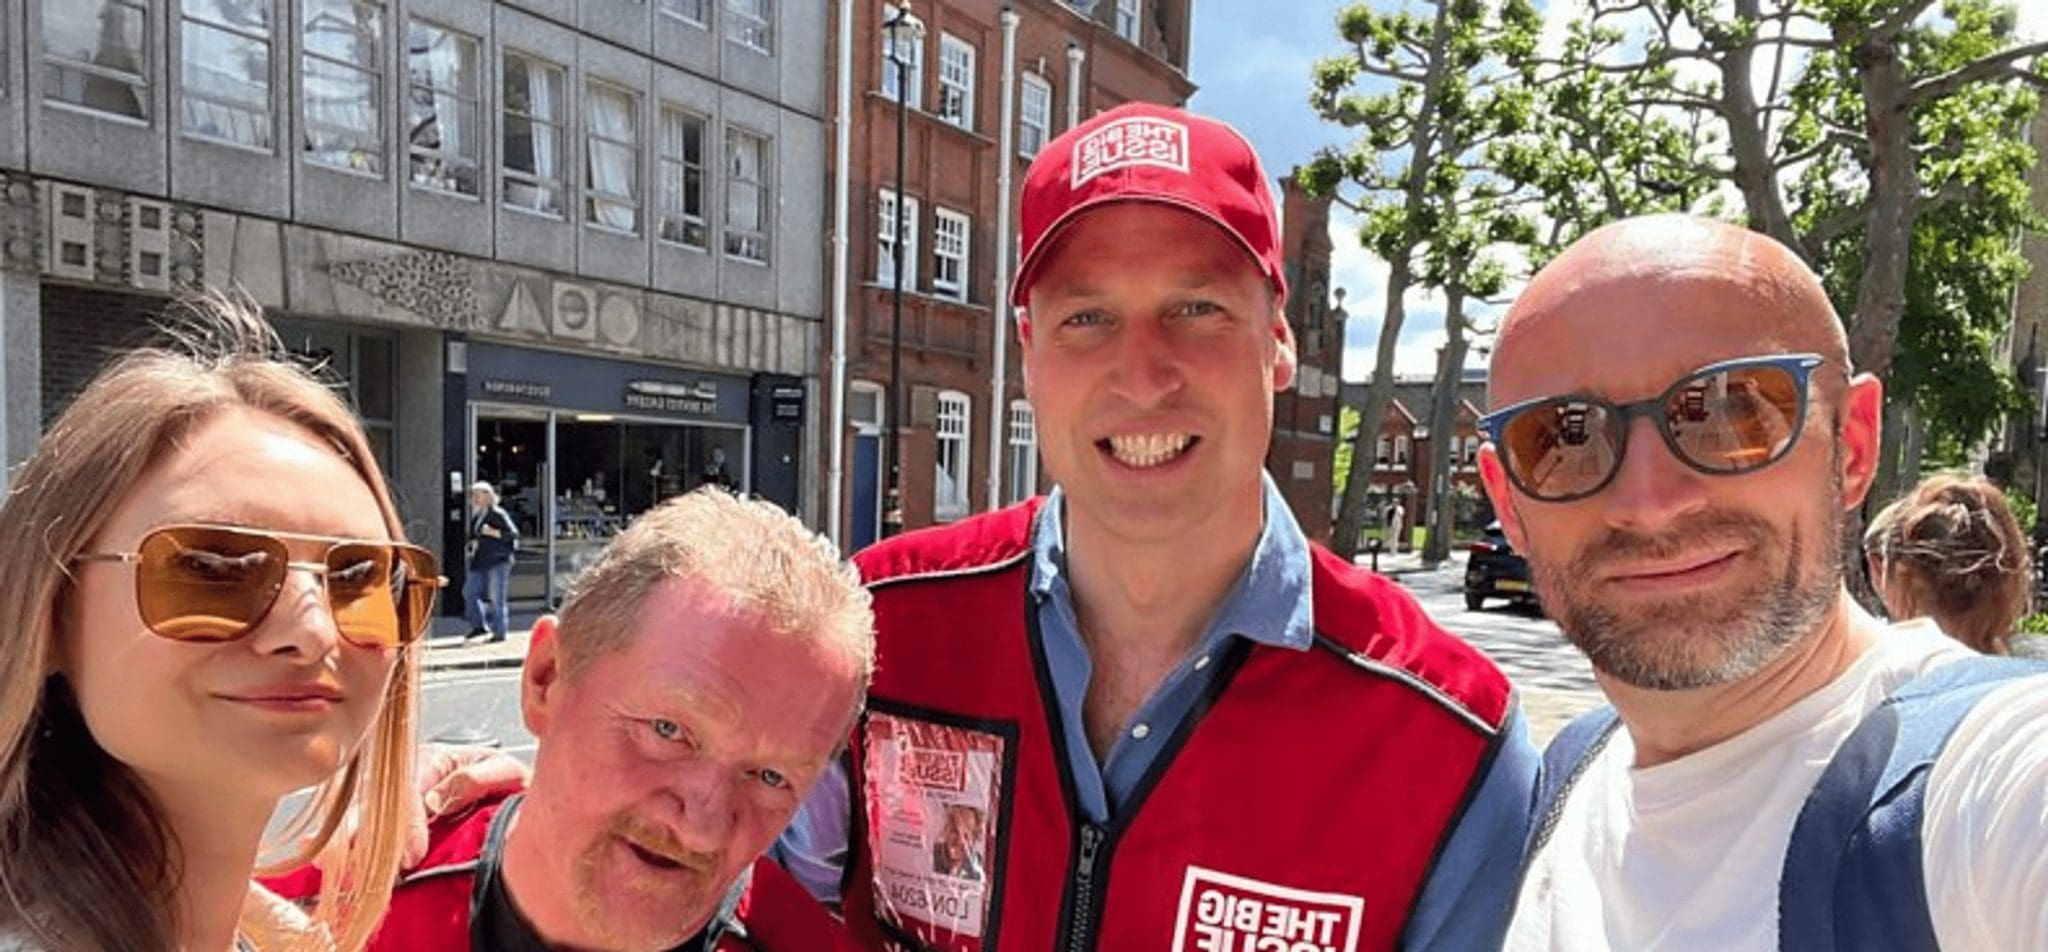 The Duke of Cambridge, in the uniform of a newspaper seller, The Big Issue, shocked a London taxi driver